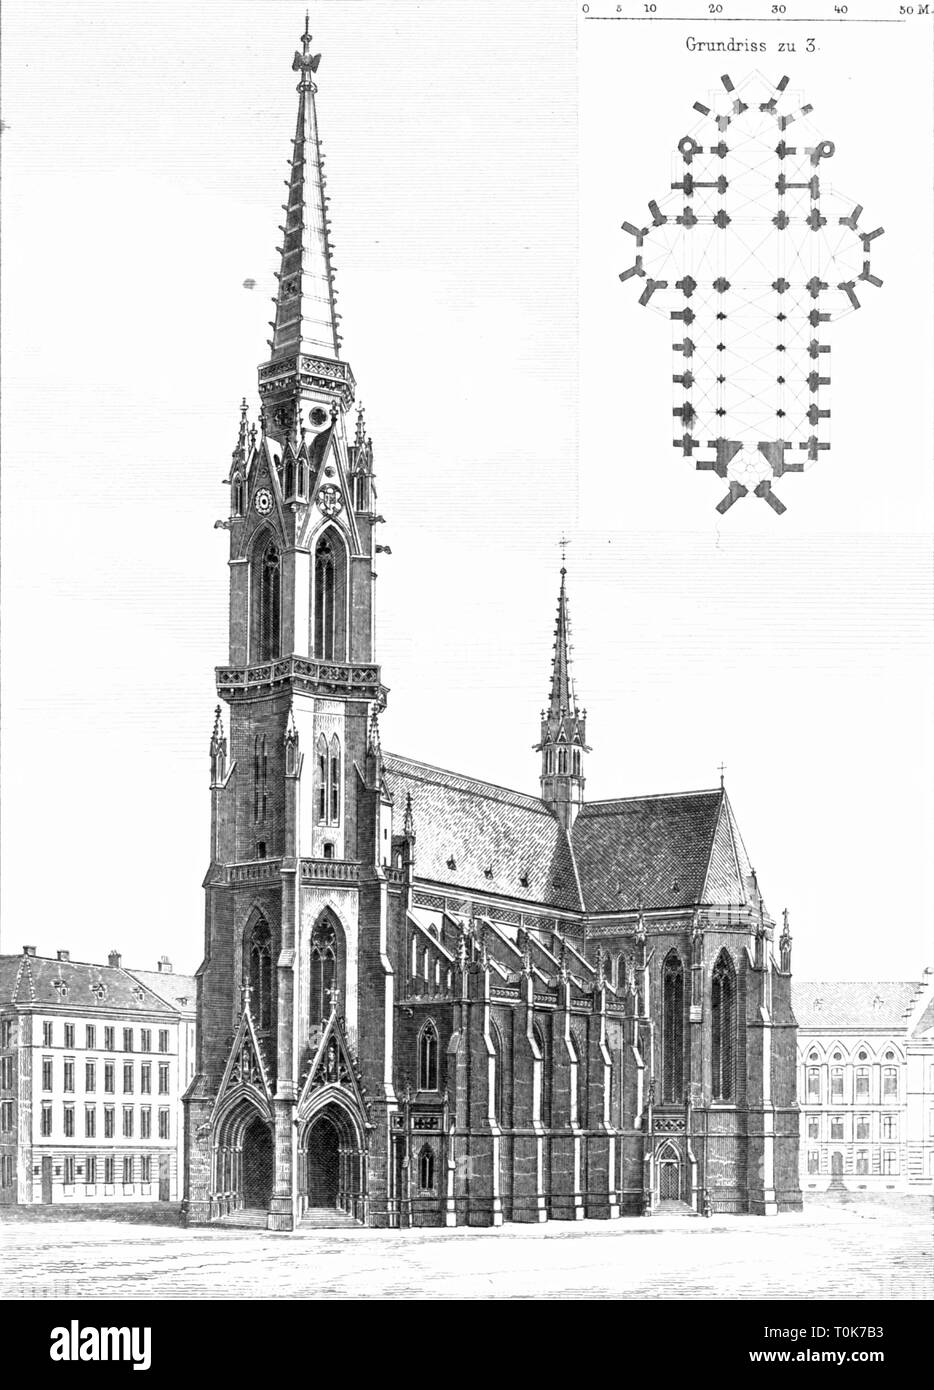 geography / travel, Austria, Vienna, churches, Church St. Othmar unter den Weissgerbern, built 1866 - 1873, architect: Friedrich von Schmidt, exterior view, illustration from 'Denkmaeler der Kunst' (Monuments of Art), by Wilhelm Luebke and Carl von Luetzow, 3rd edition, Stuttgart 1879, volume 2, chapter on architecture, plate LII, steel engraving, Central Europe, 19th century, building, historic, historical, religious, sacred, neo-Gothic, neo-Gothic style, Gothic Revival, Denkmaler, Denkmäler, Lübke, Lubke, Lützow, Lutzow, Weißgerbern, Additional-Rights-Clearance-Info-Not-Available Stock Photo